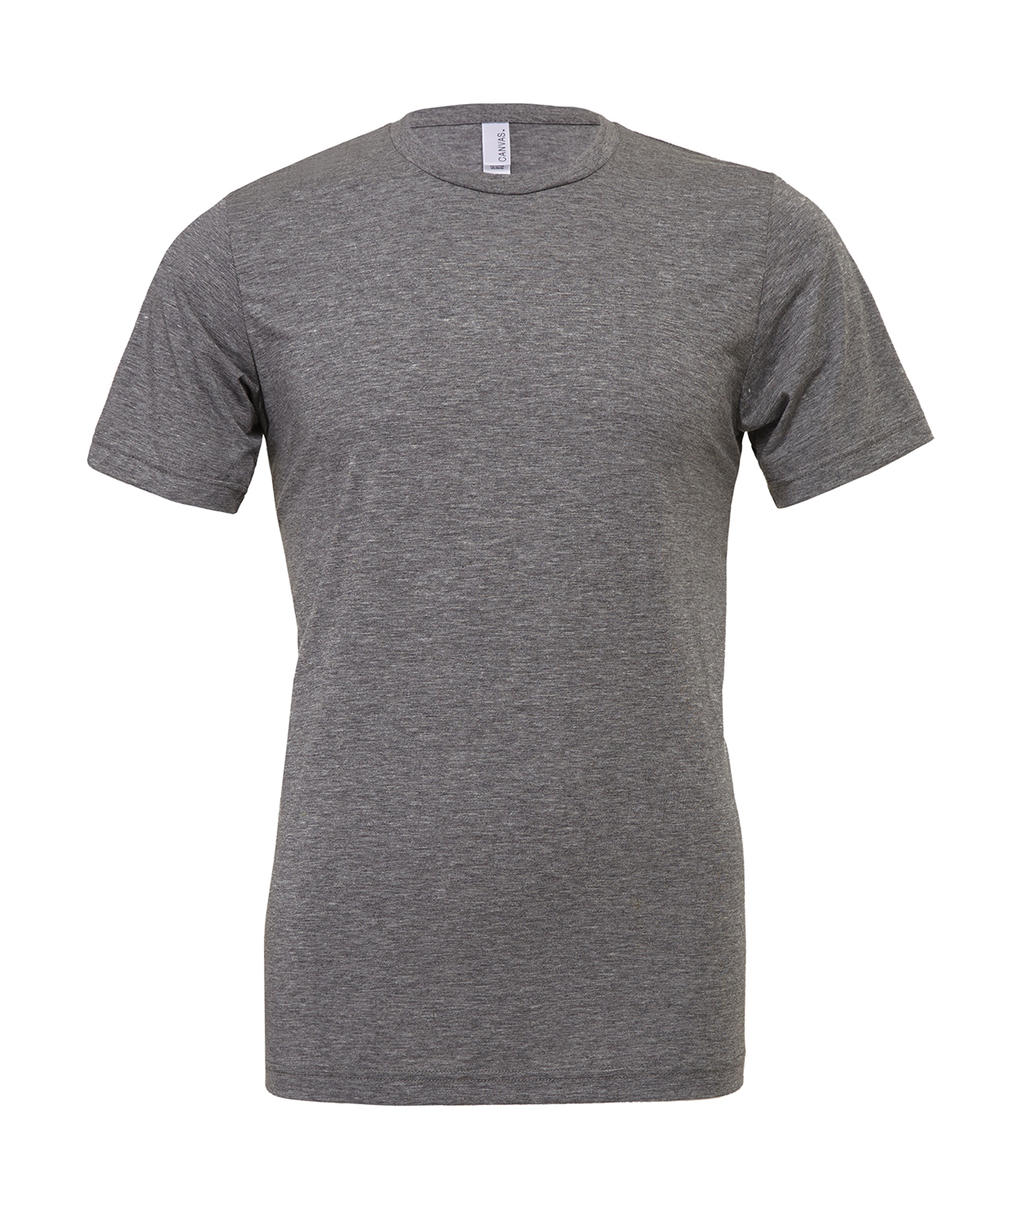  Unisex Triblend Short Sleeve Tee in Farbe Grey Triblend